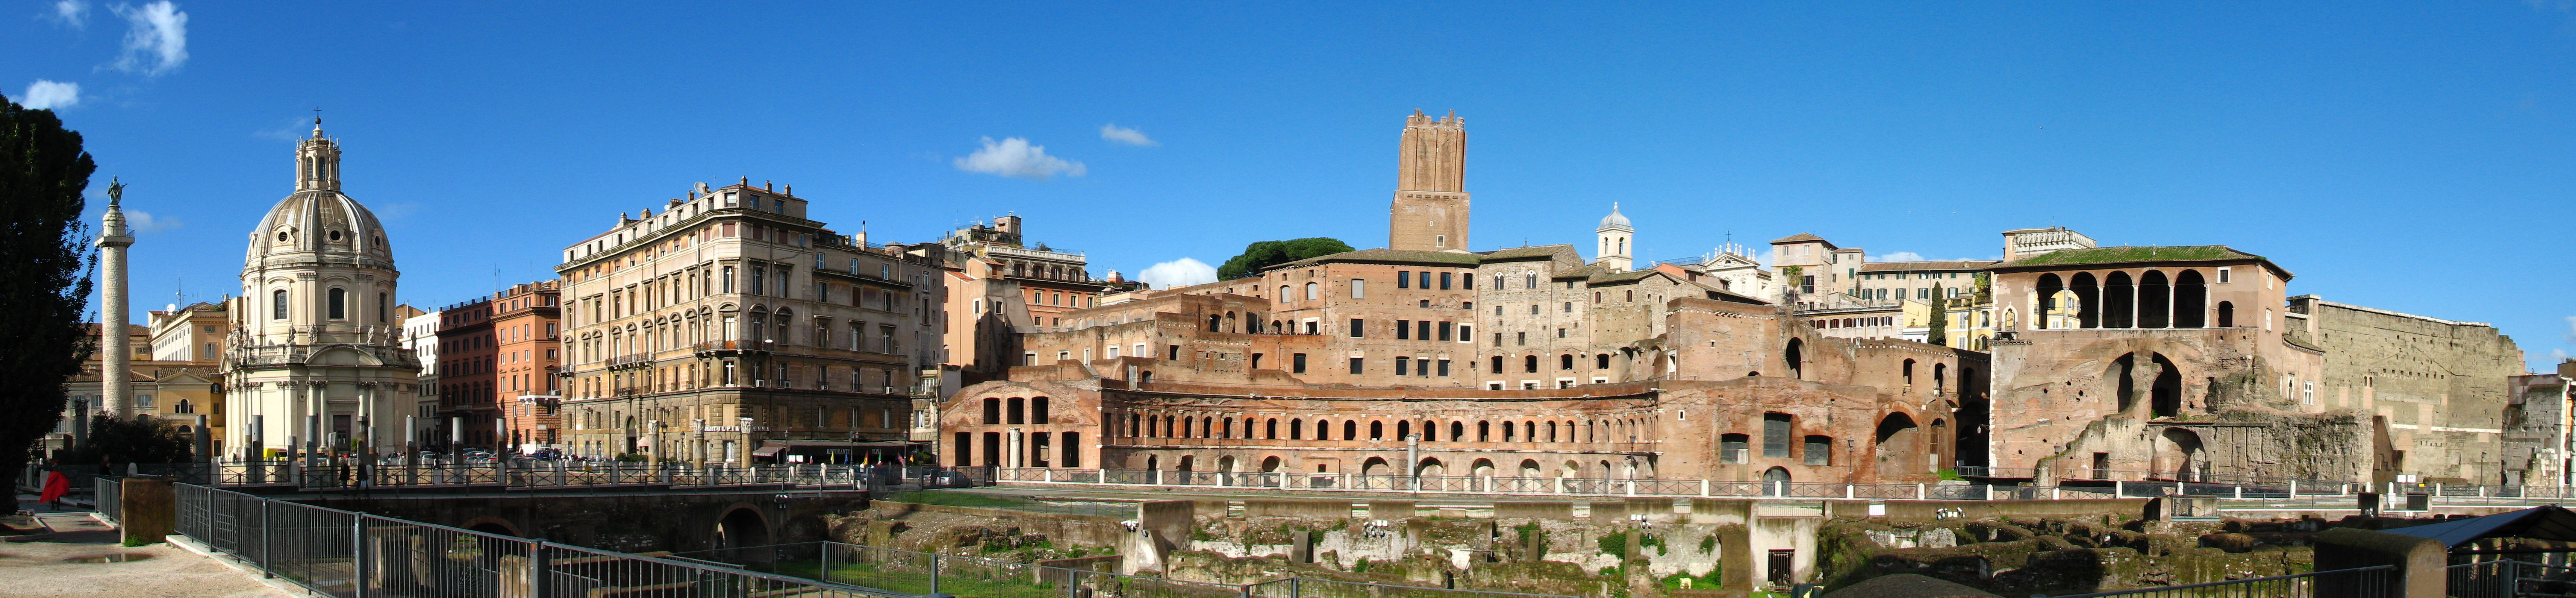 A panoramic view of the Trajan's Forum in Rome, on the far left is the Trajan's Column.